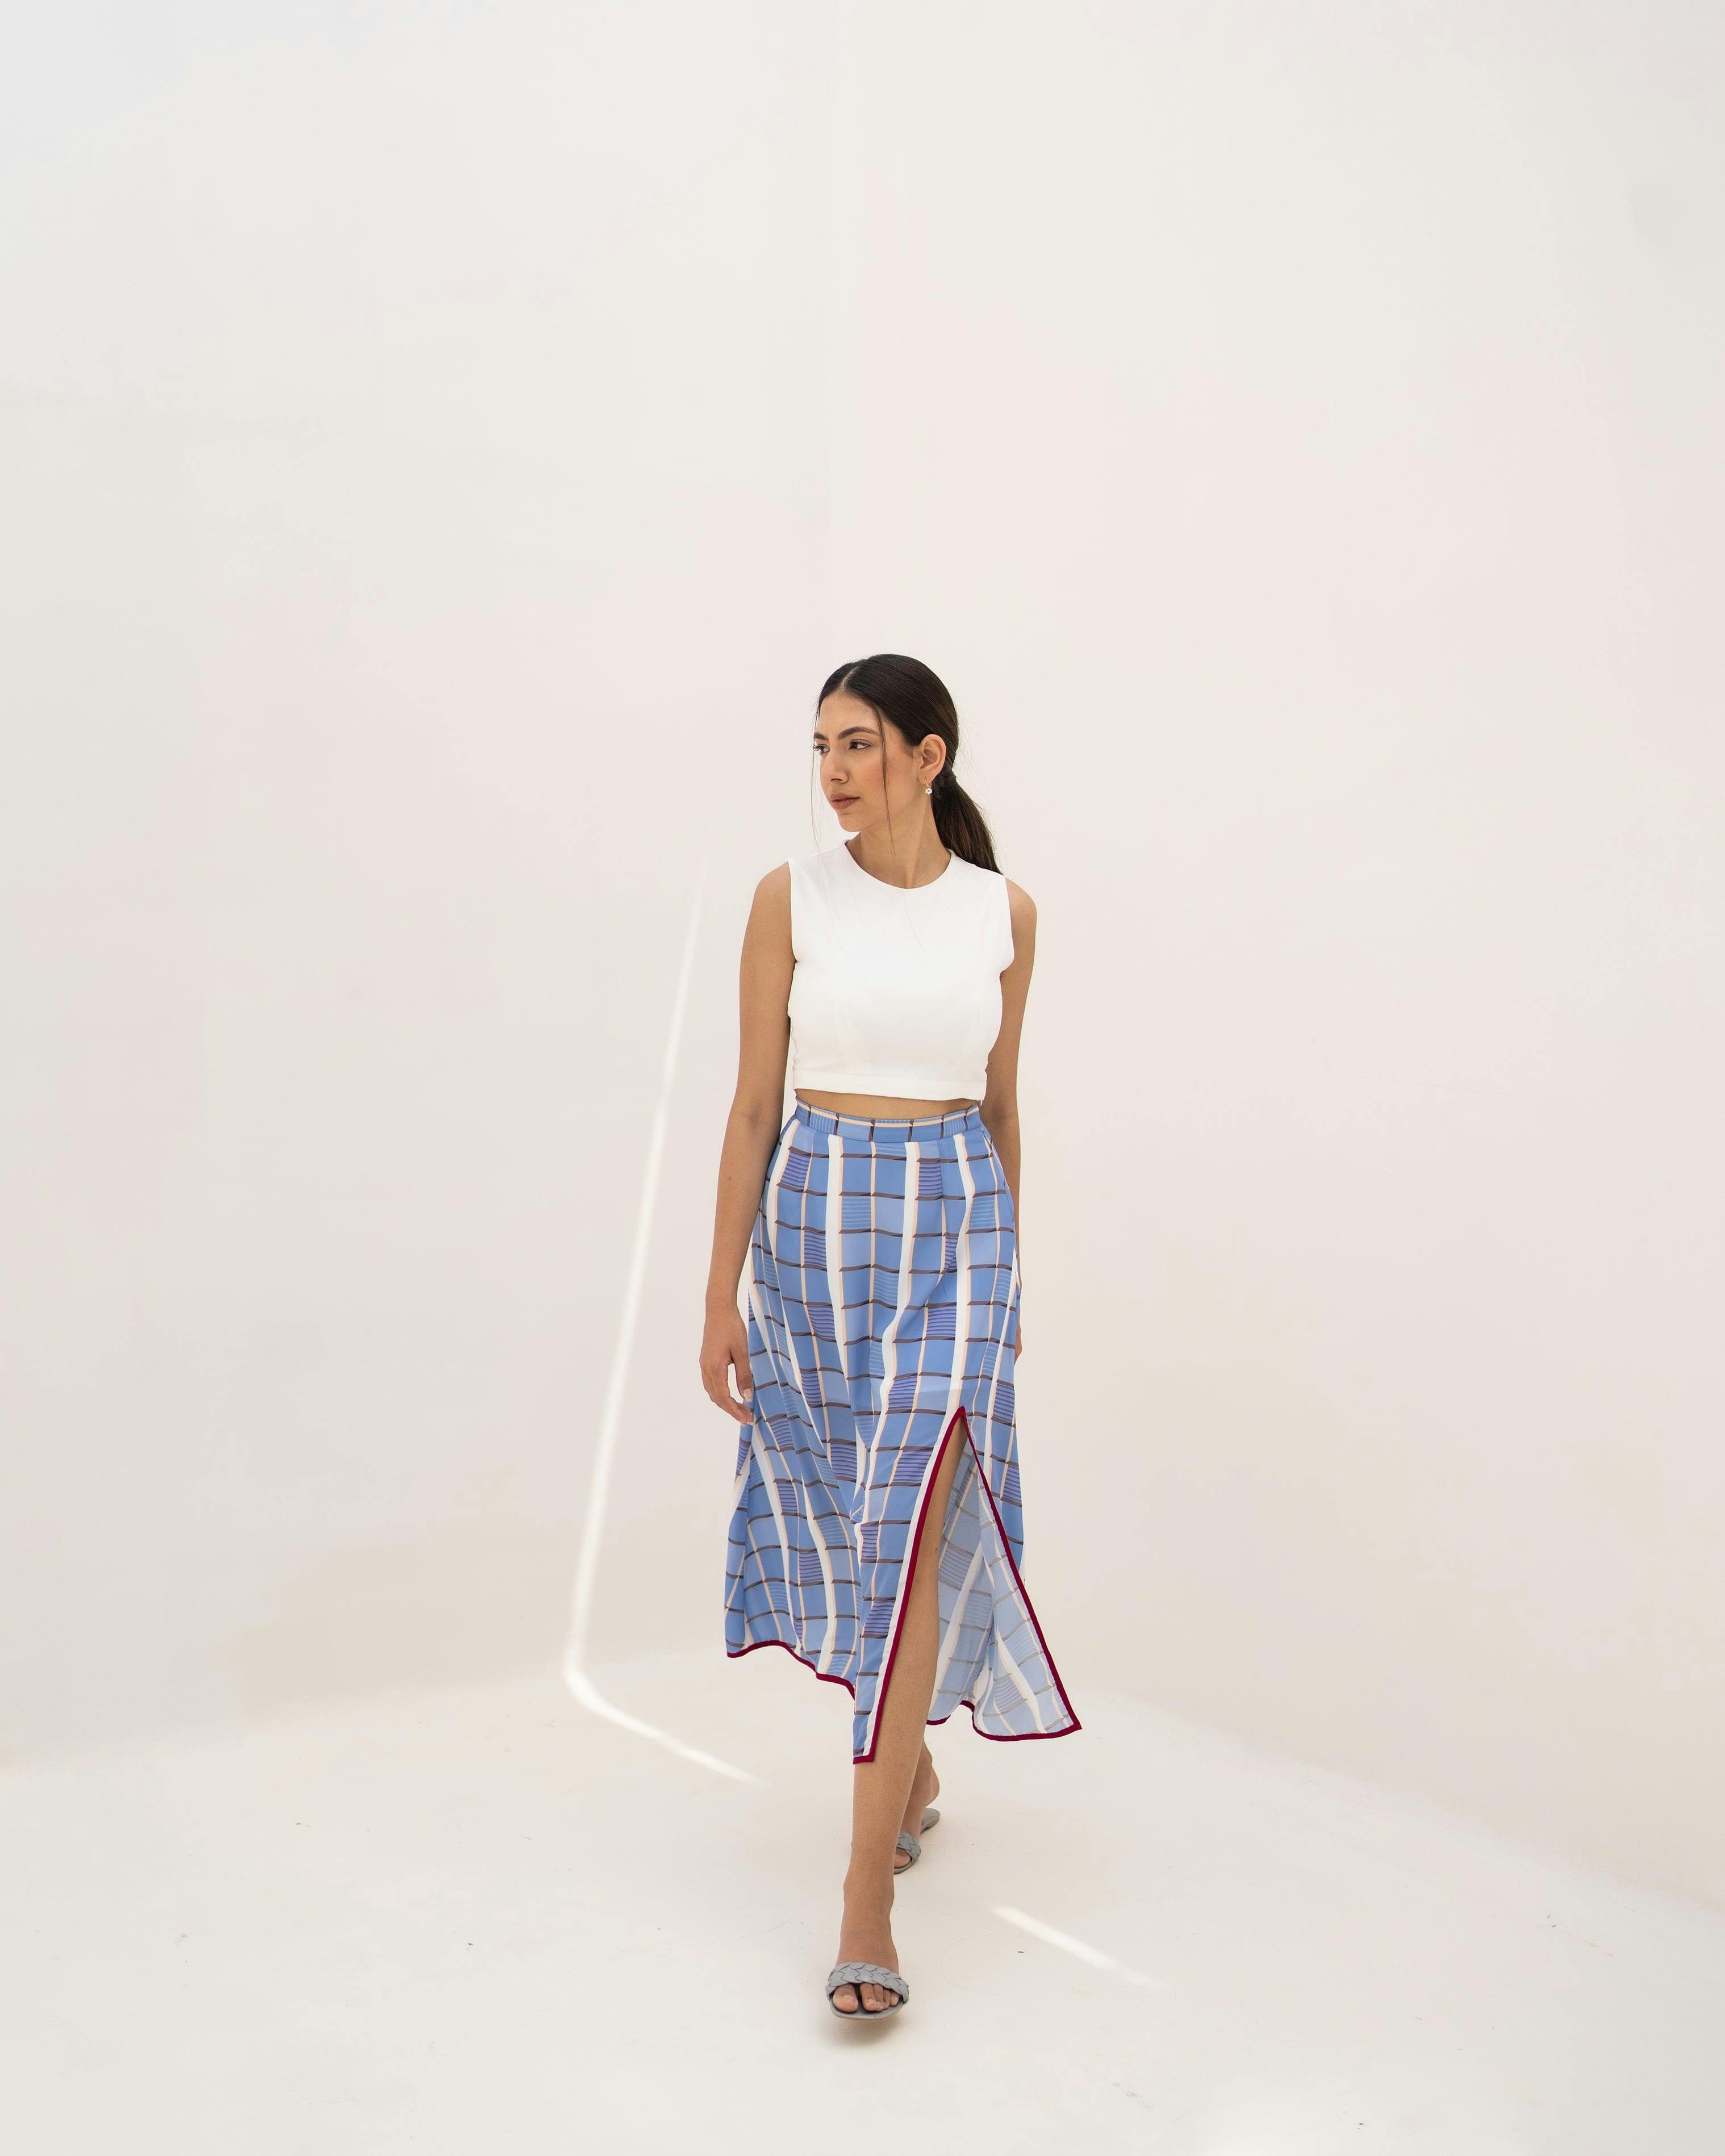 Crop top and printed skirt set, a product by Kritika Madan